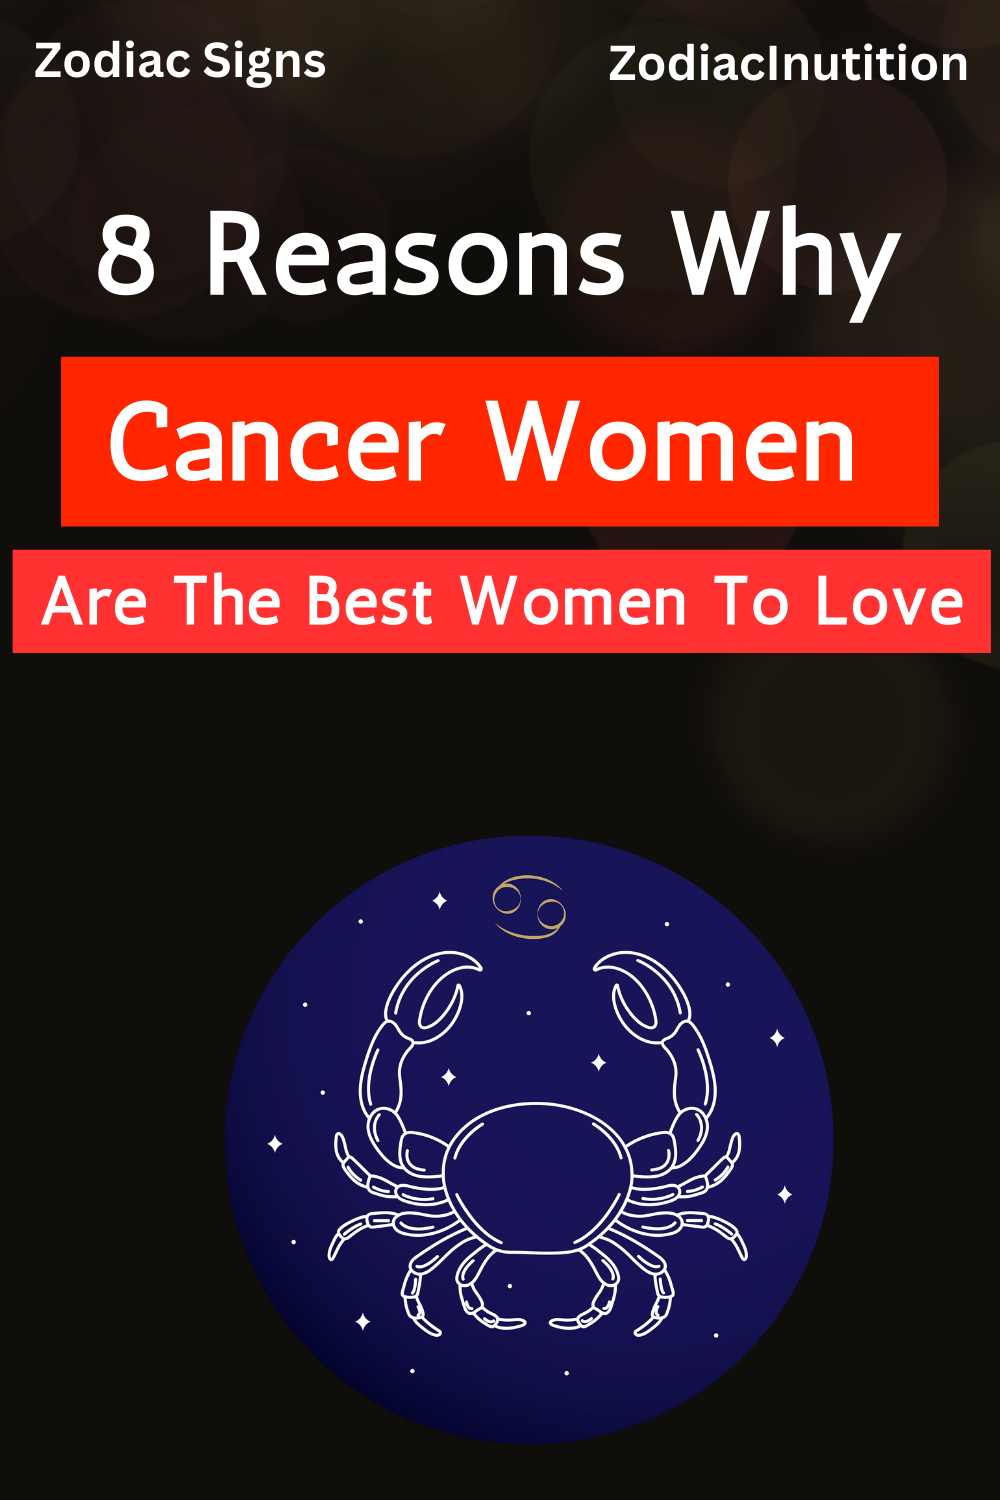 8 Reasons Why Cancer Women Are The Best Women To Love